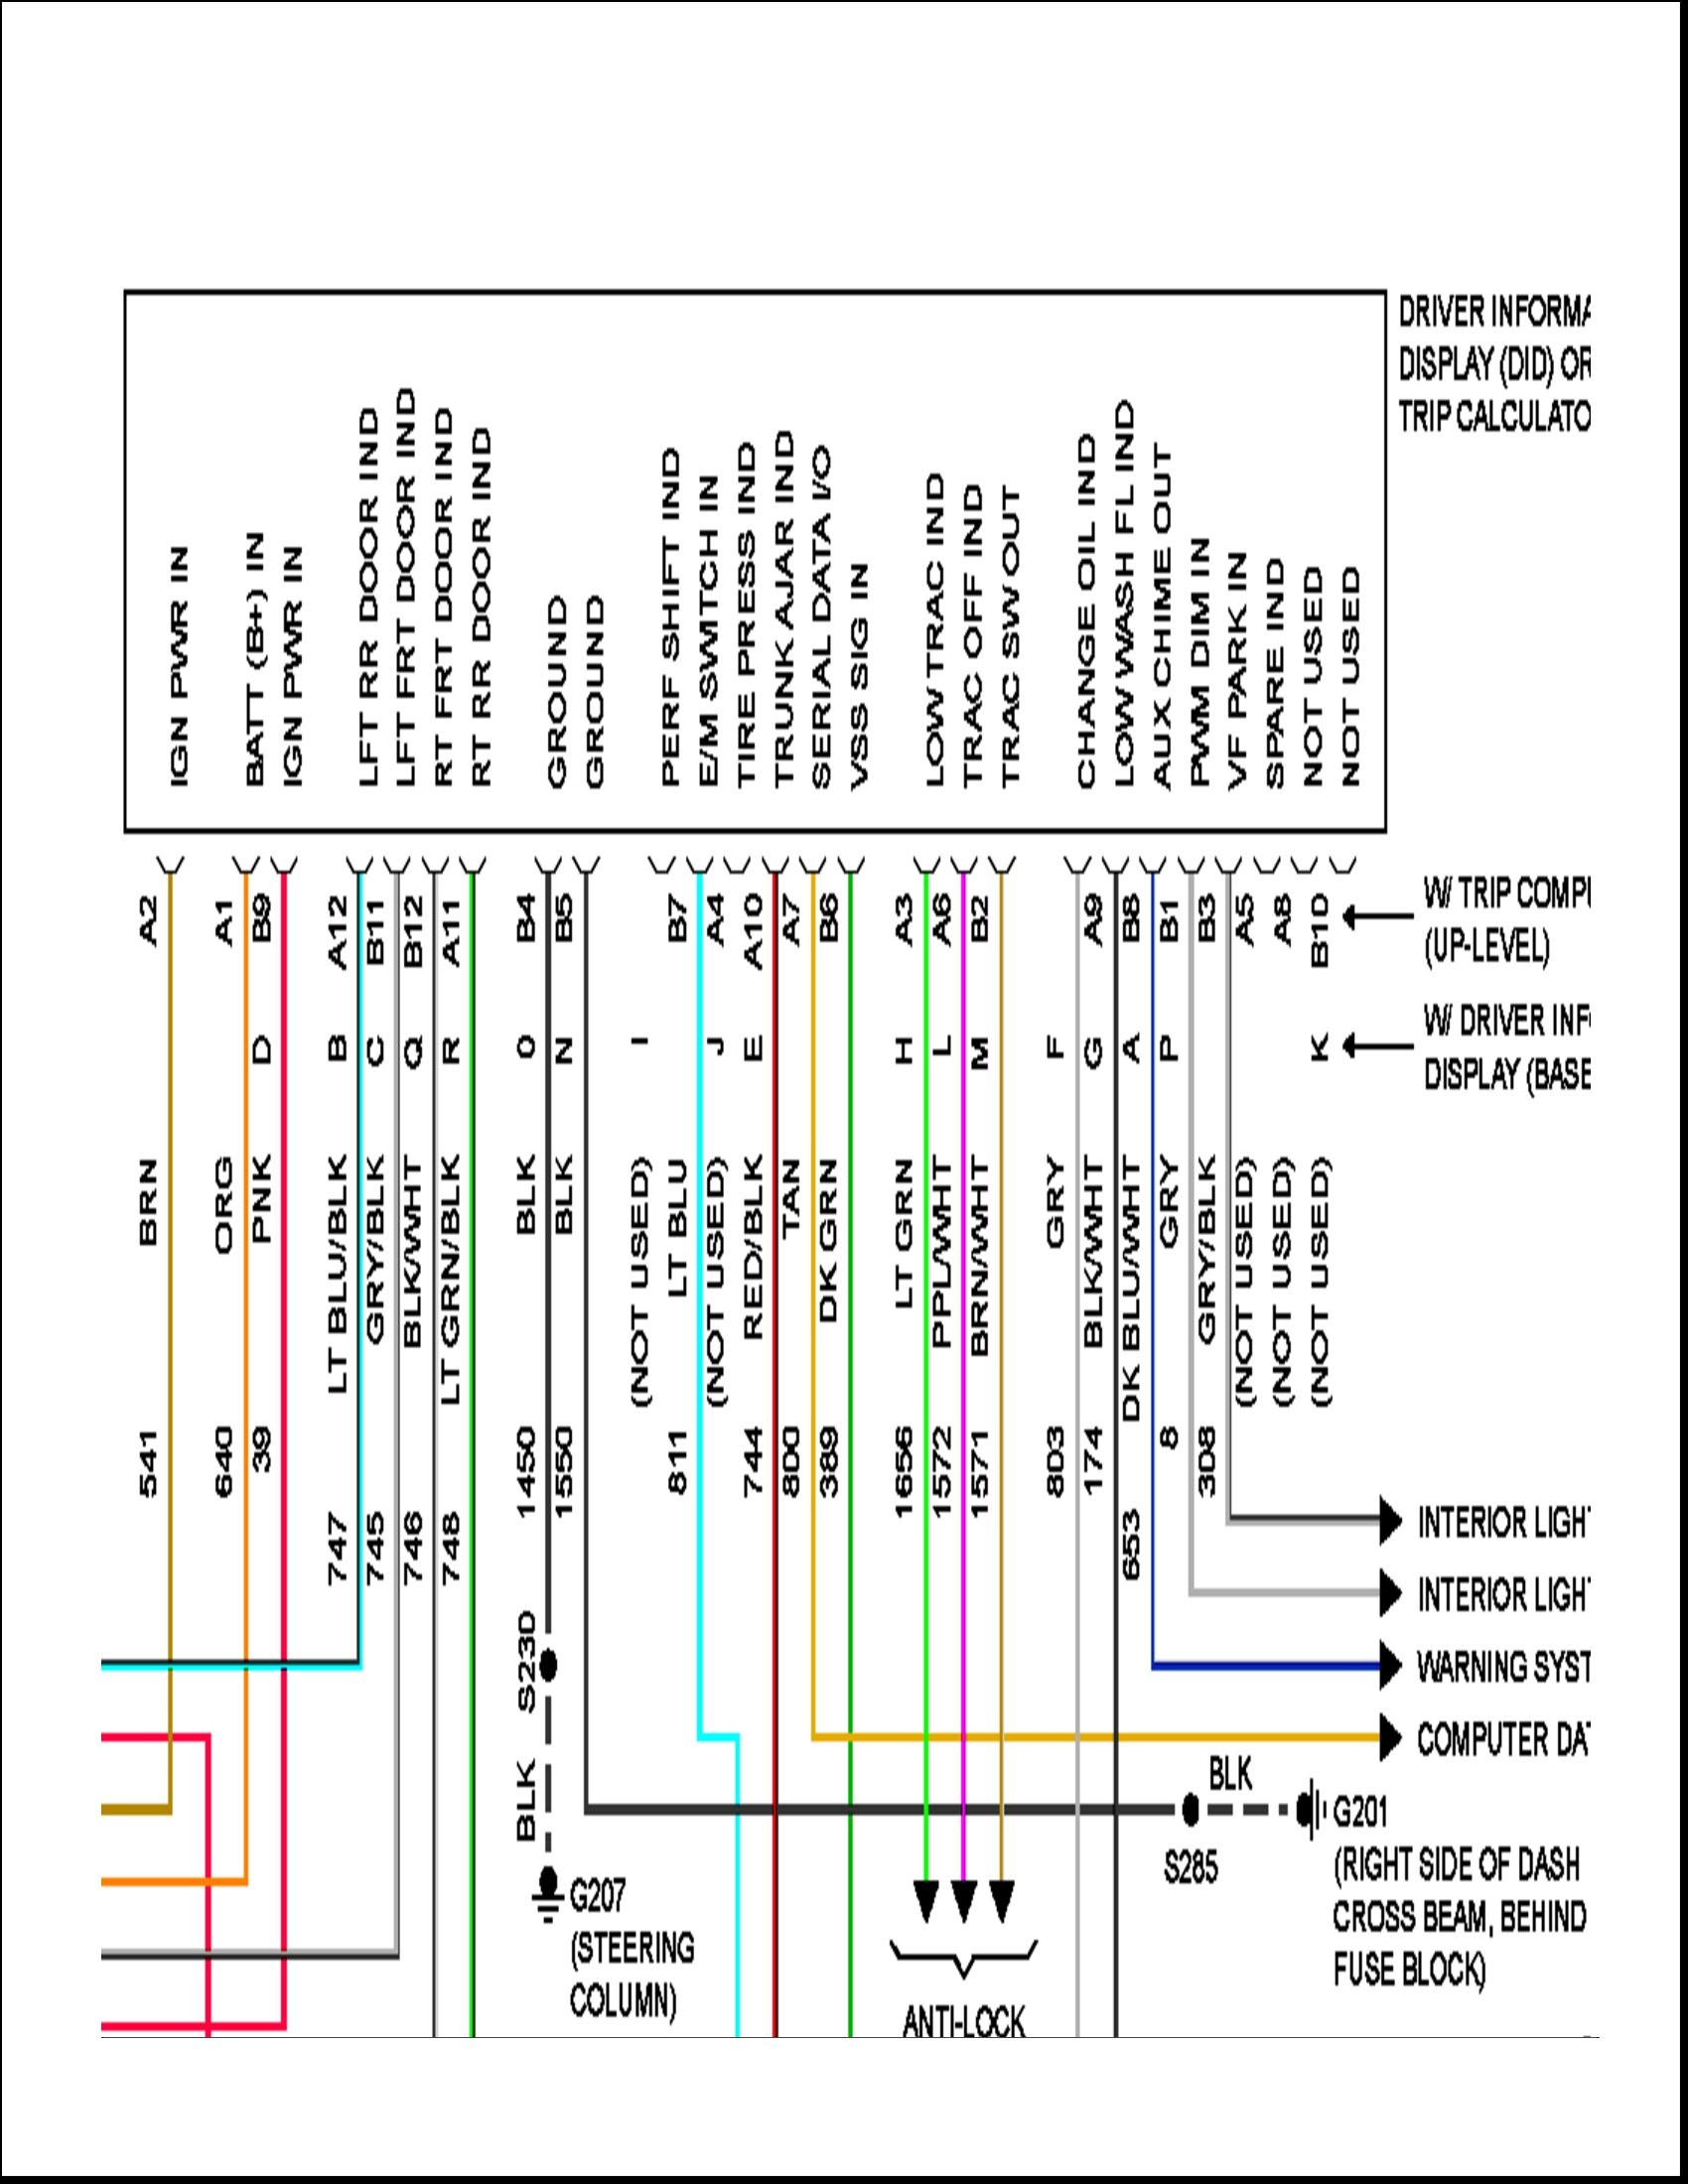 2003 Sunfire Stereo Wiring Diagram - Wiring Diagram